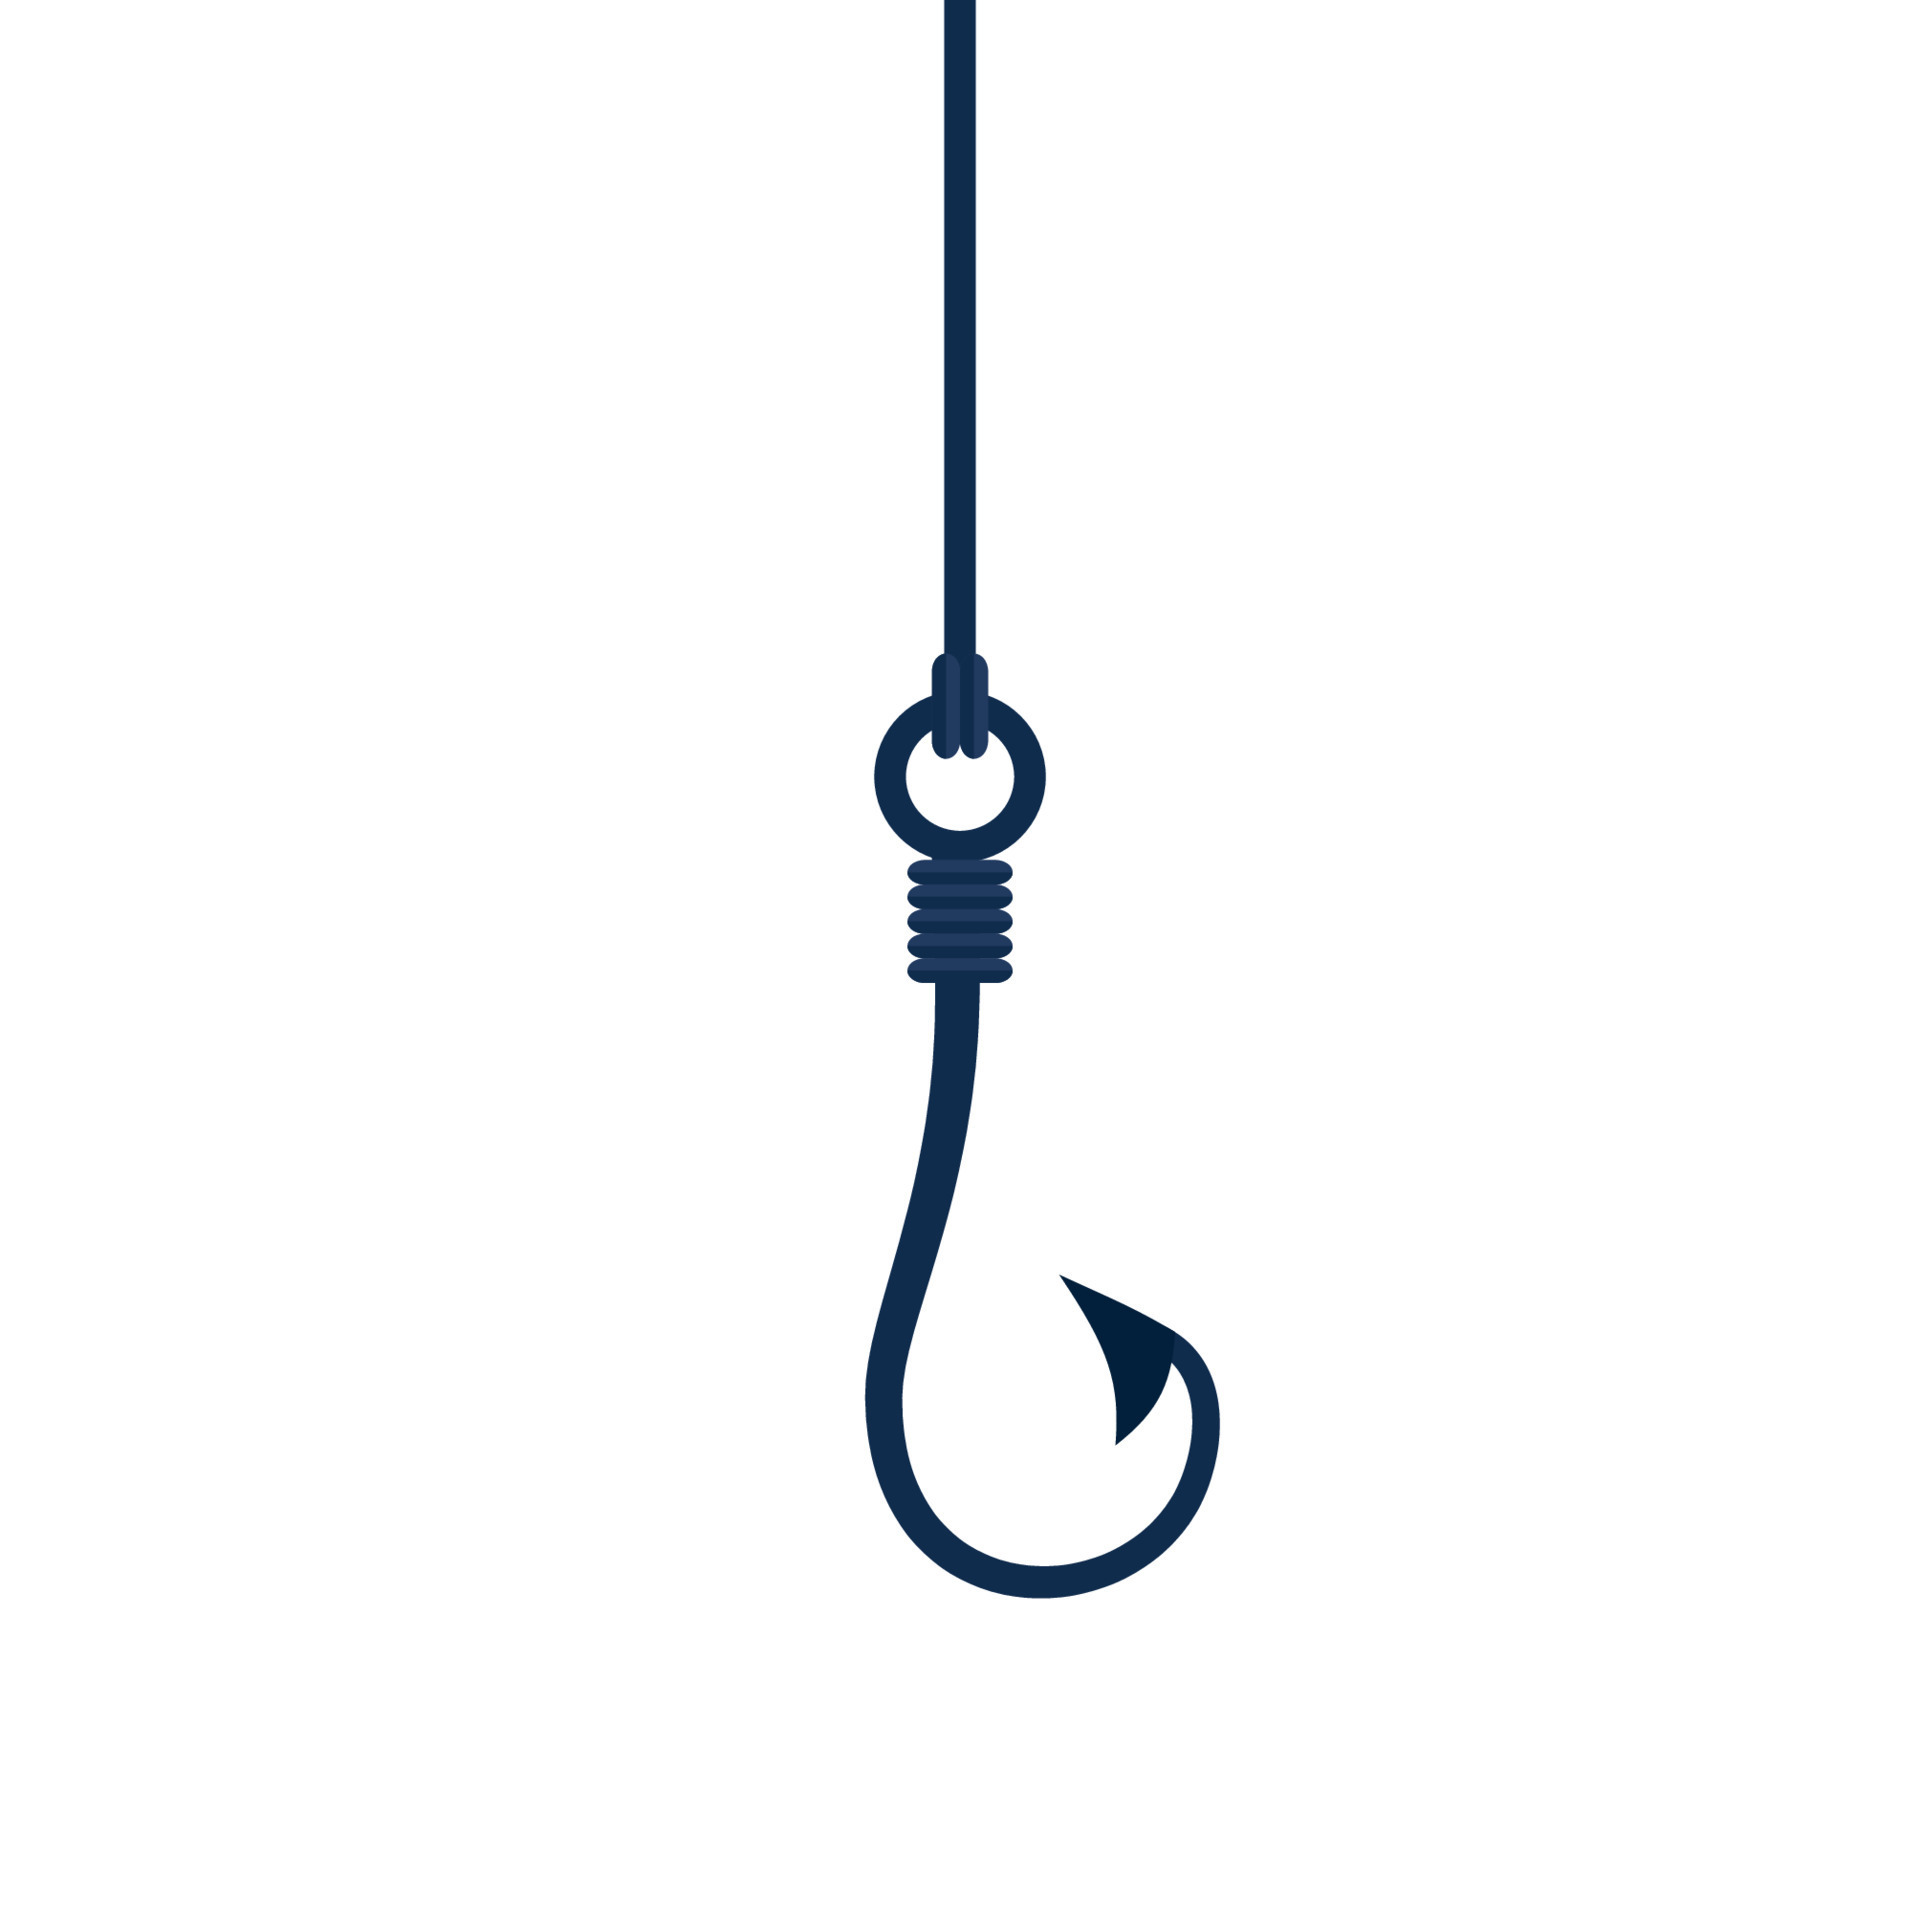 Empty fishing hook. Tackle for fishing. Vector illustration